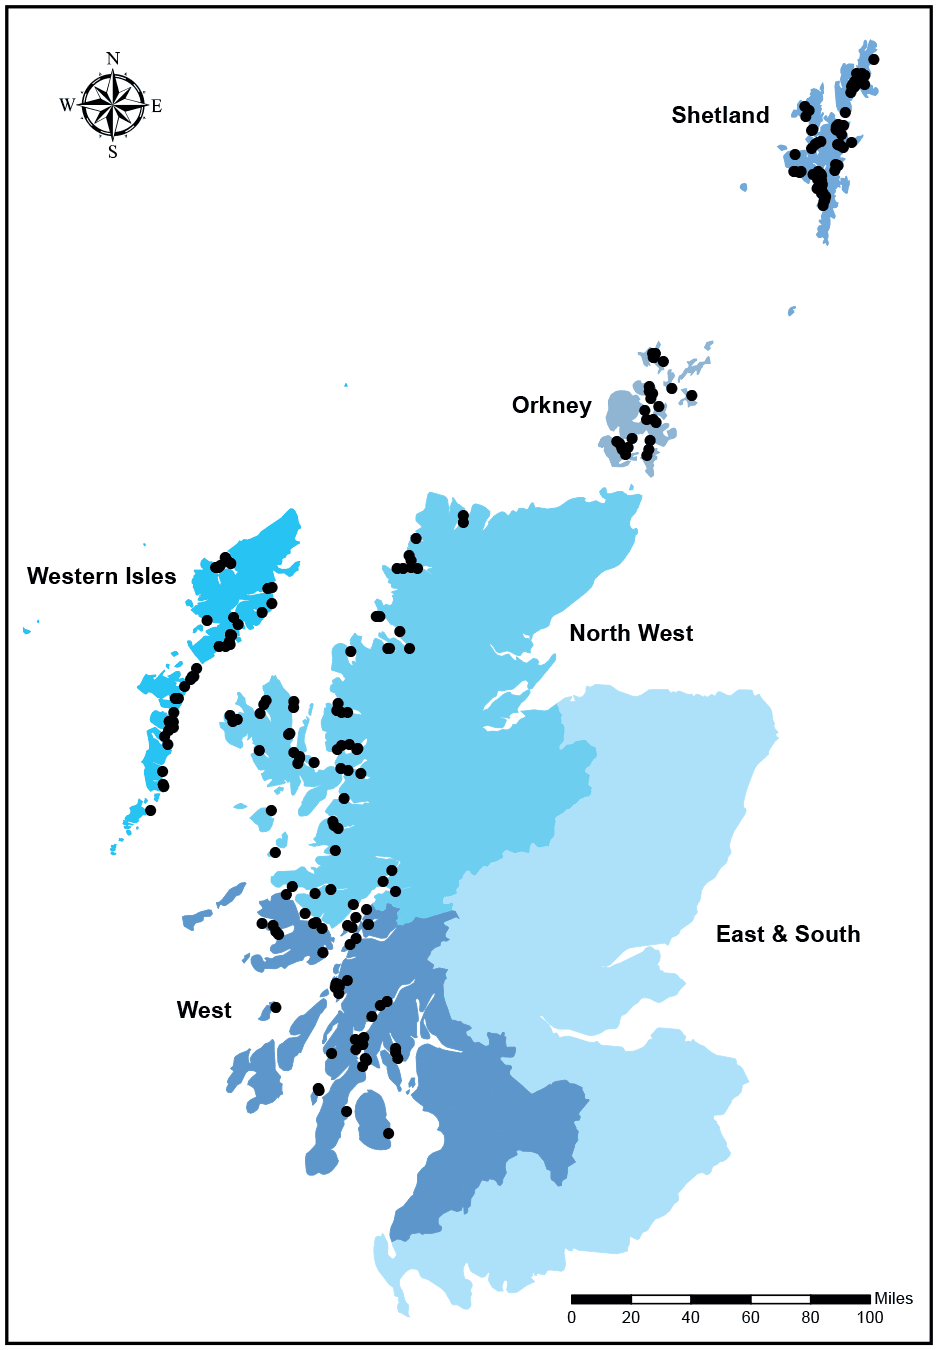 This is a map showing the distribution of active Atlantic salmon production sites in Scotland in 2021. The map is split into 6 areas: Shetland, Orkney, North West, East & South, West and Western Isles and has black dots showing where each site is on the map.